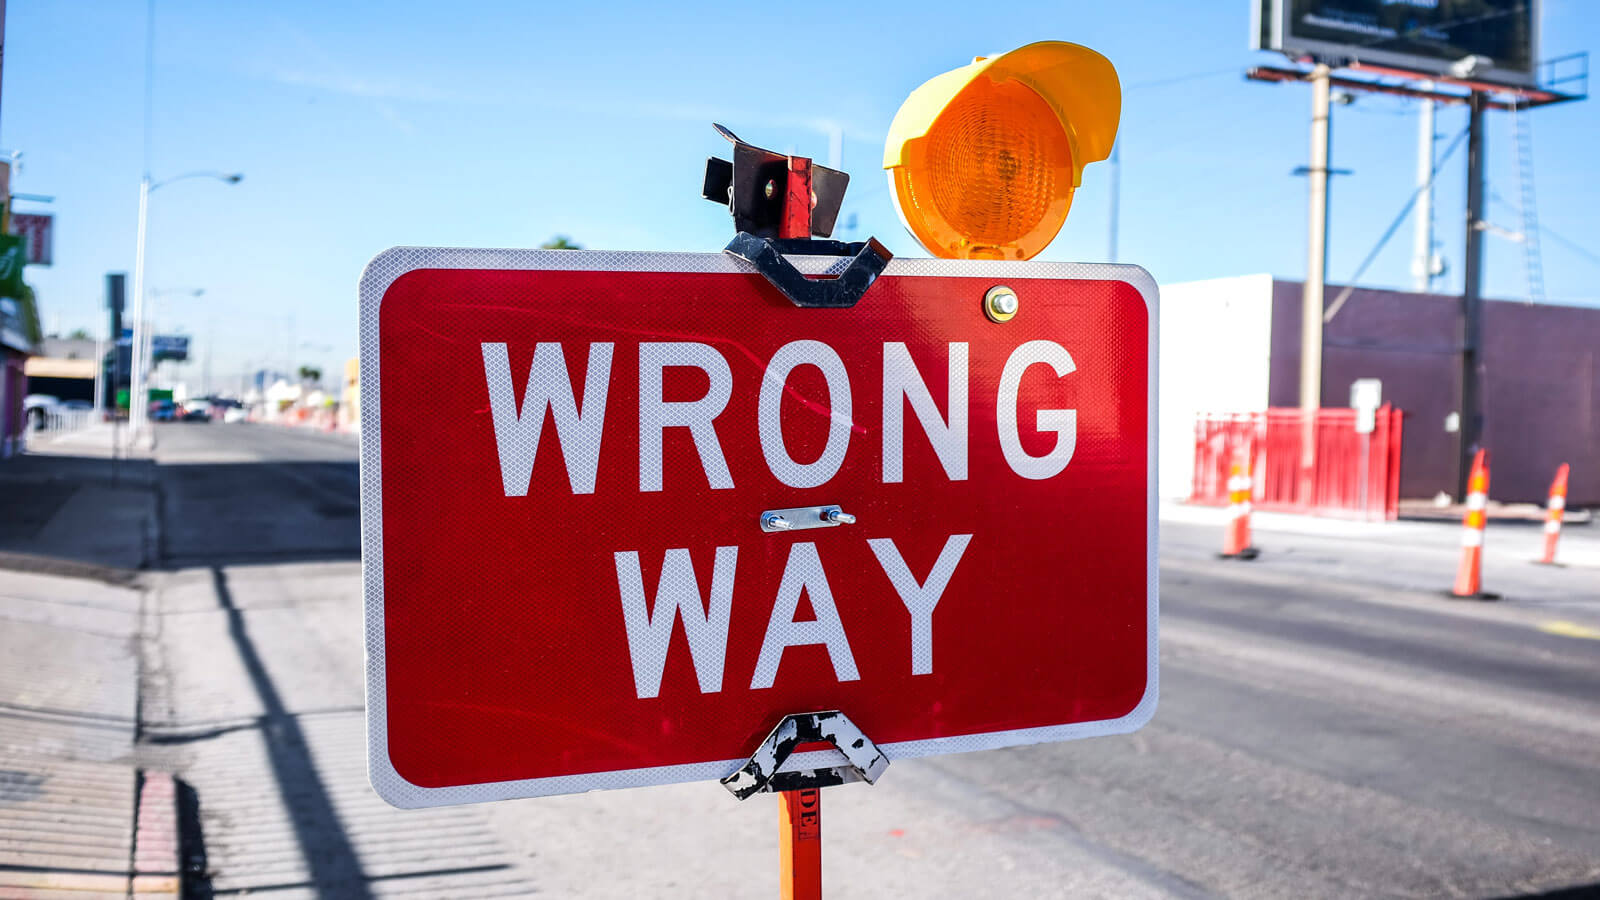 Going the wrong way is common for innovators